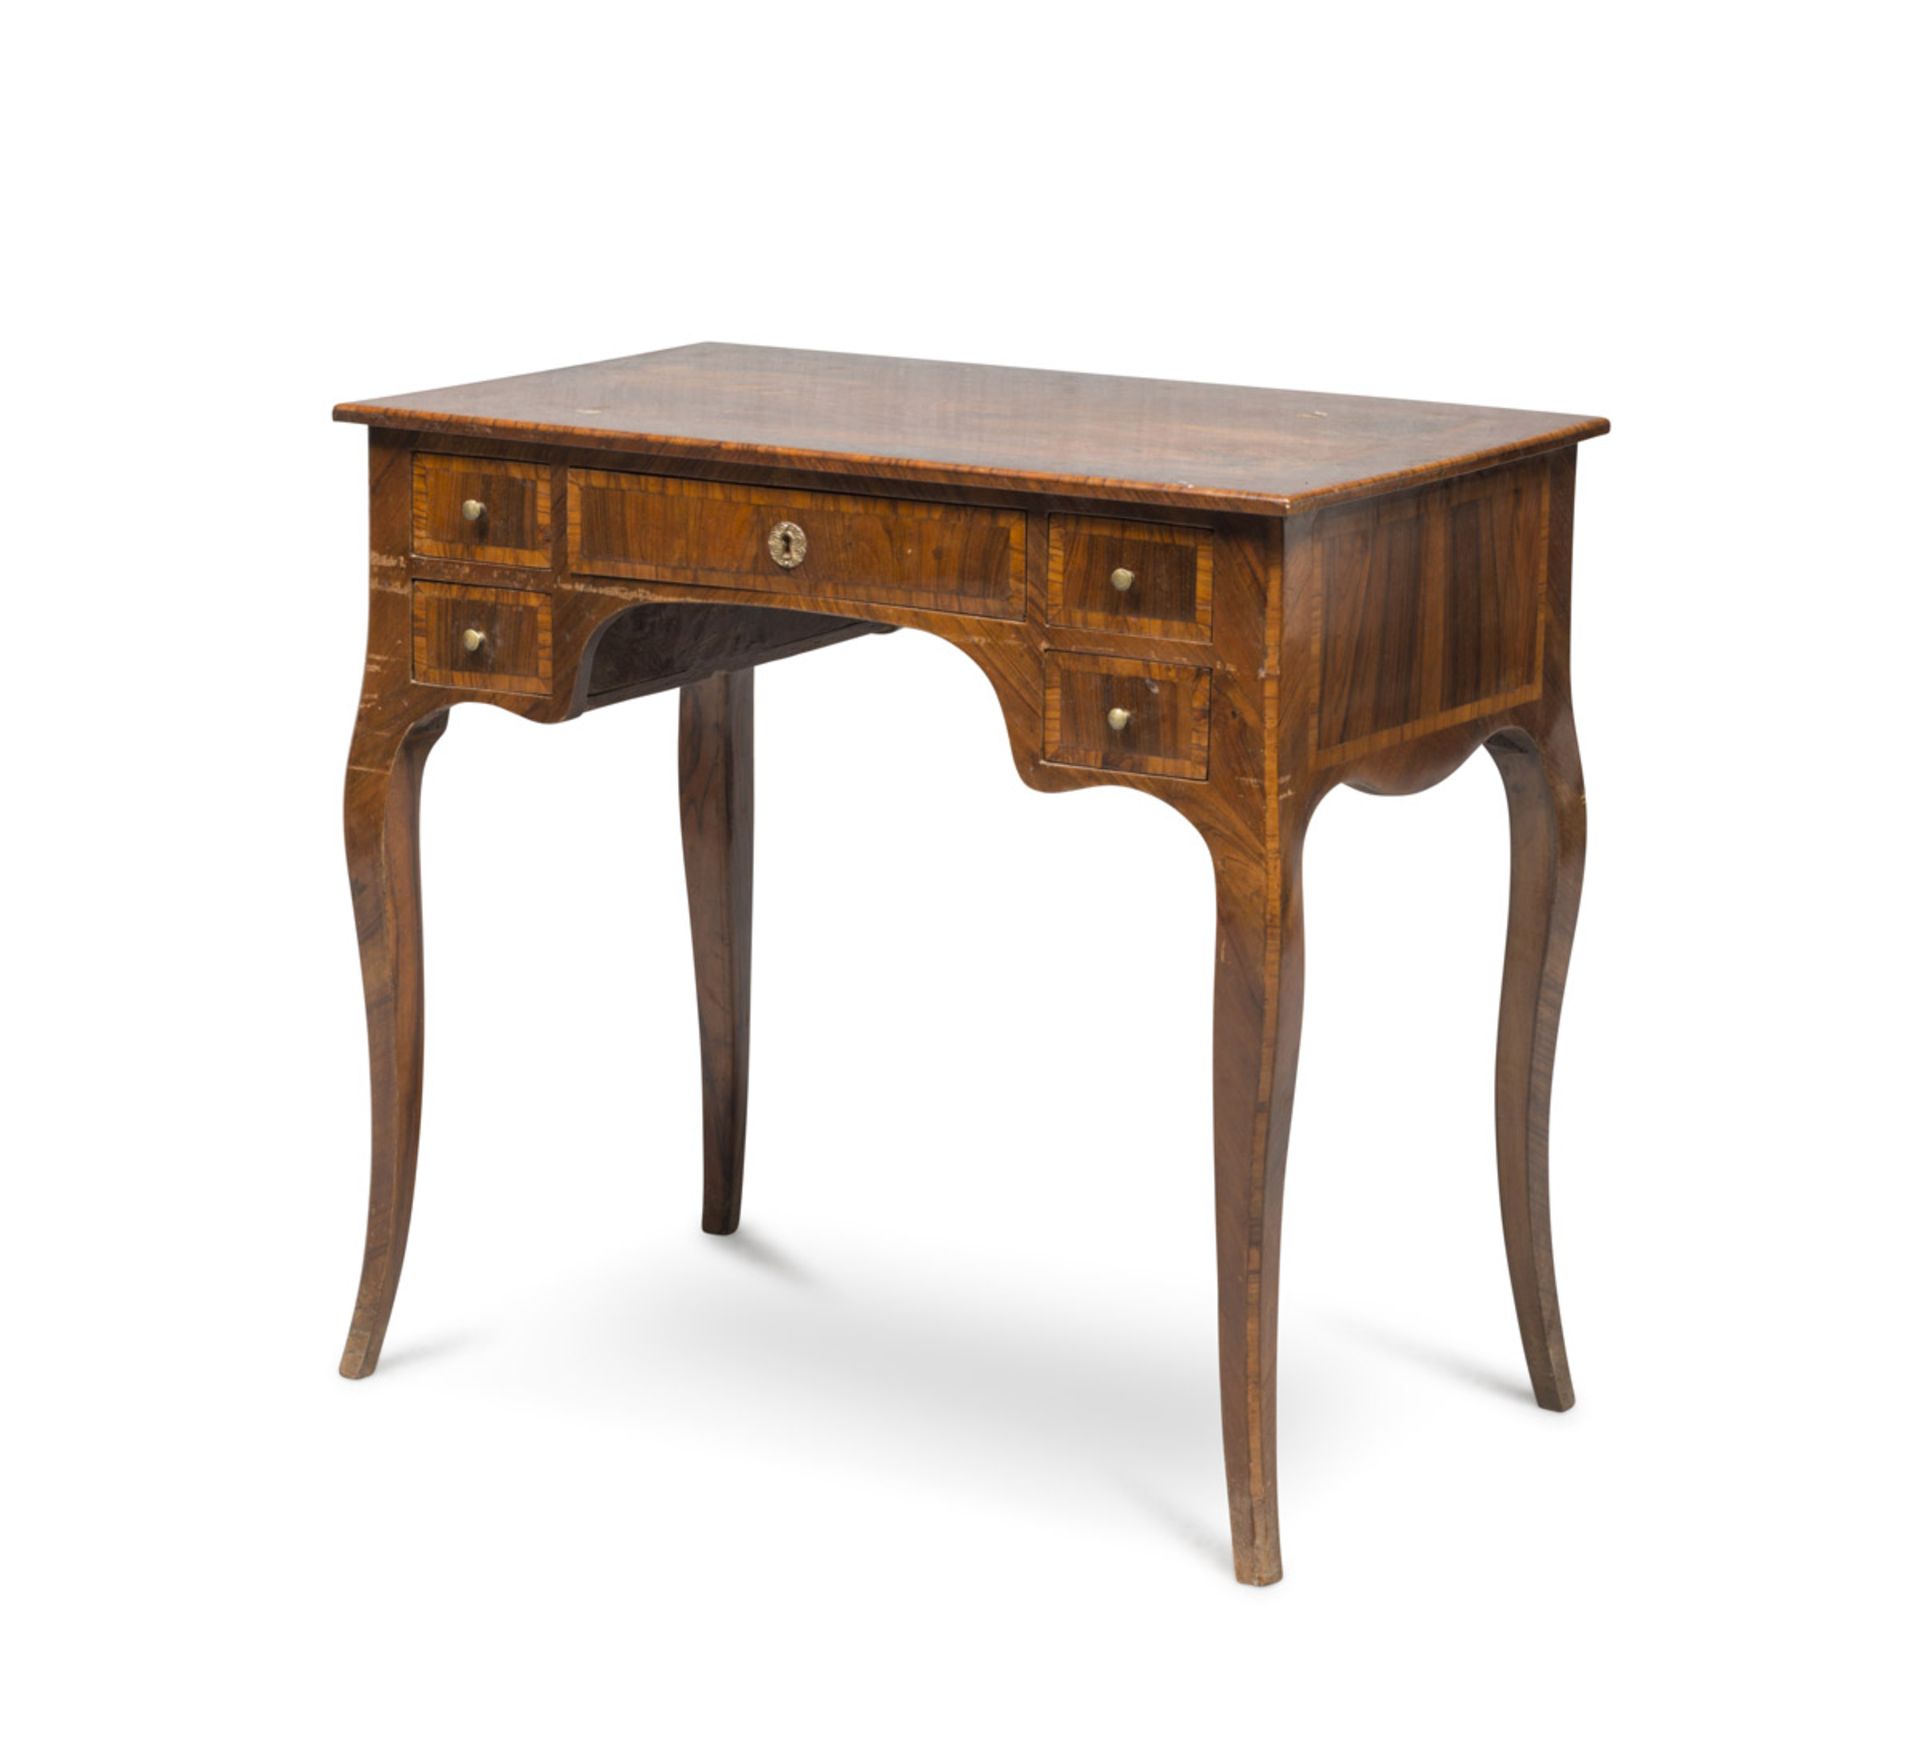 SMALL WRITING DESK IN WALNUT, 19TH CENTURY of eighteenth-century line, with reserves in violet wood.